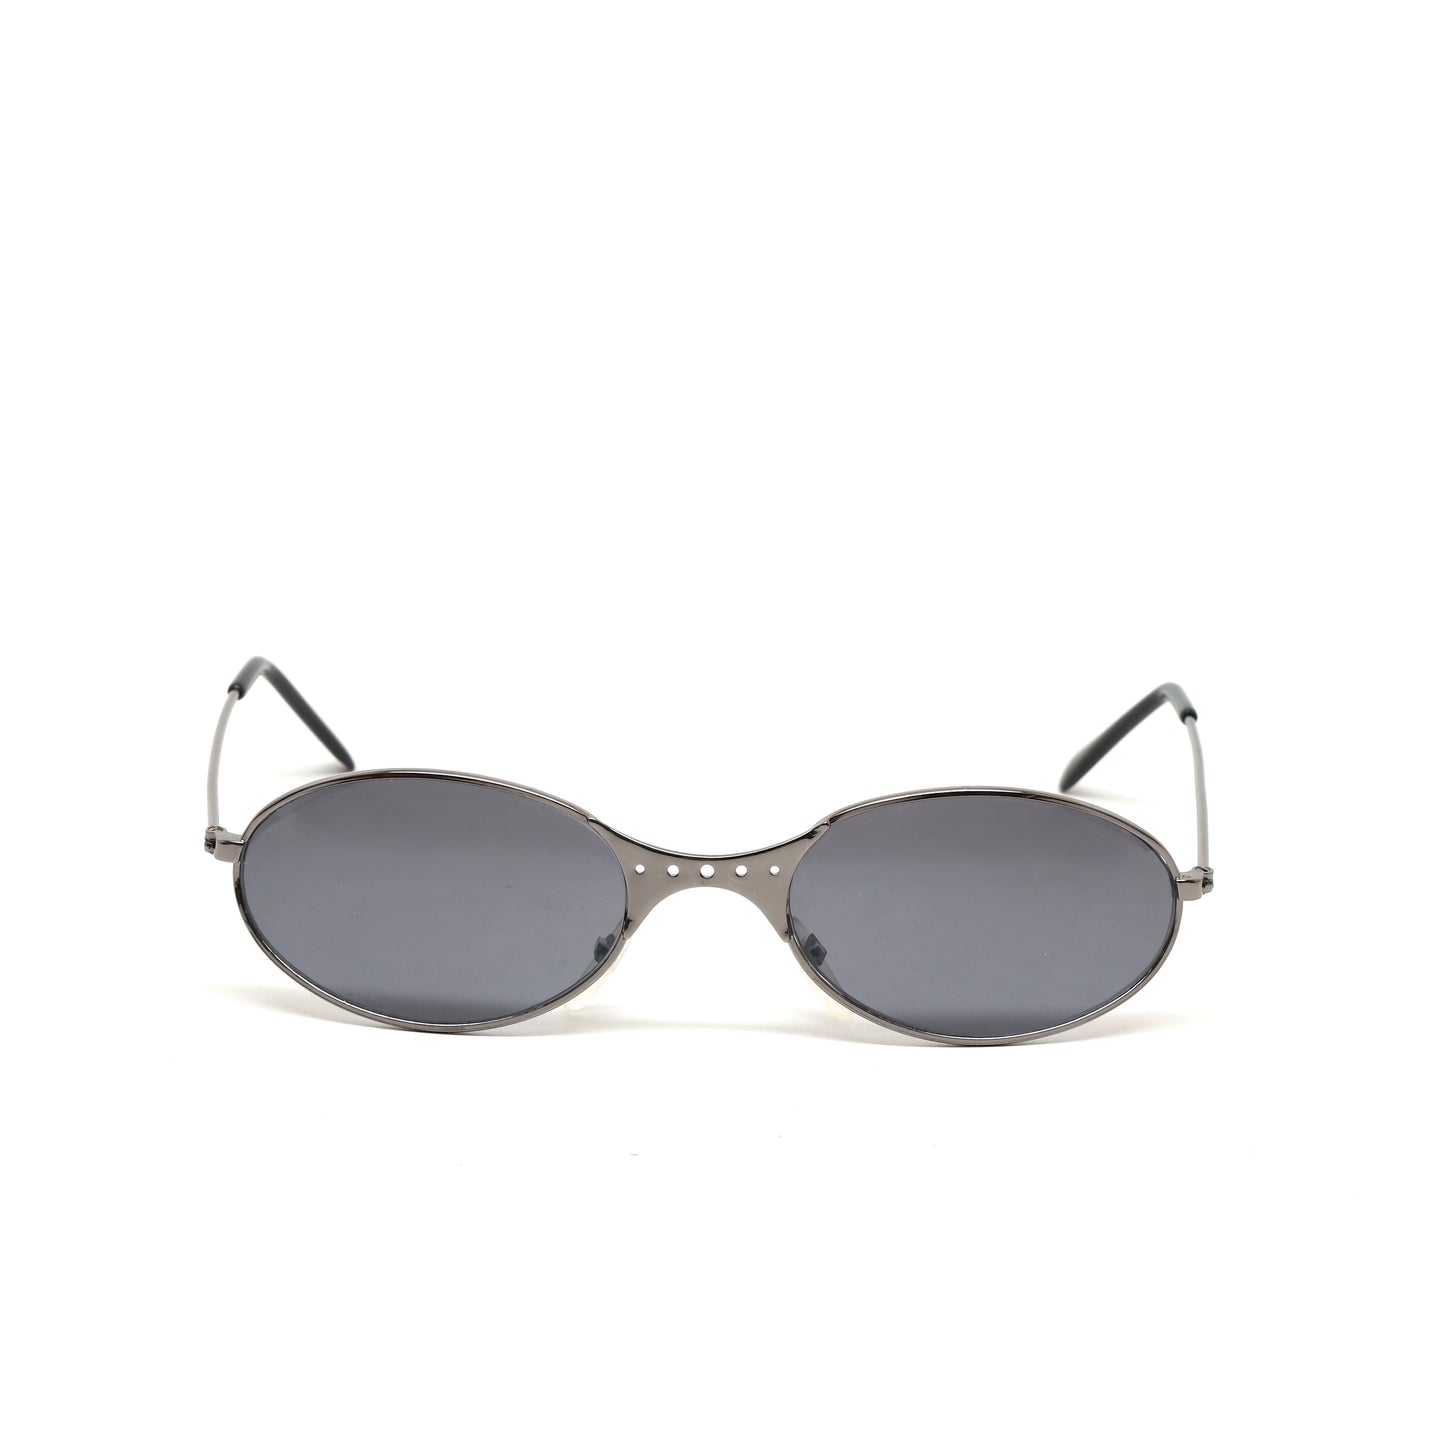 Deadstock Vintage Industrial Style Wire Oval Sunglasses - Grey